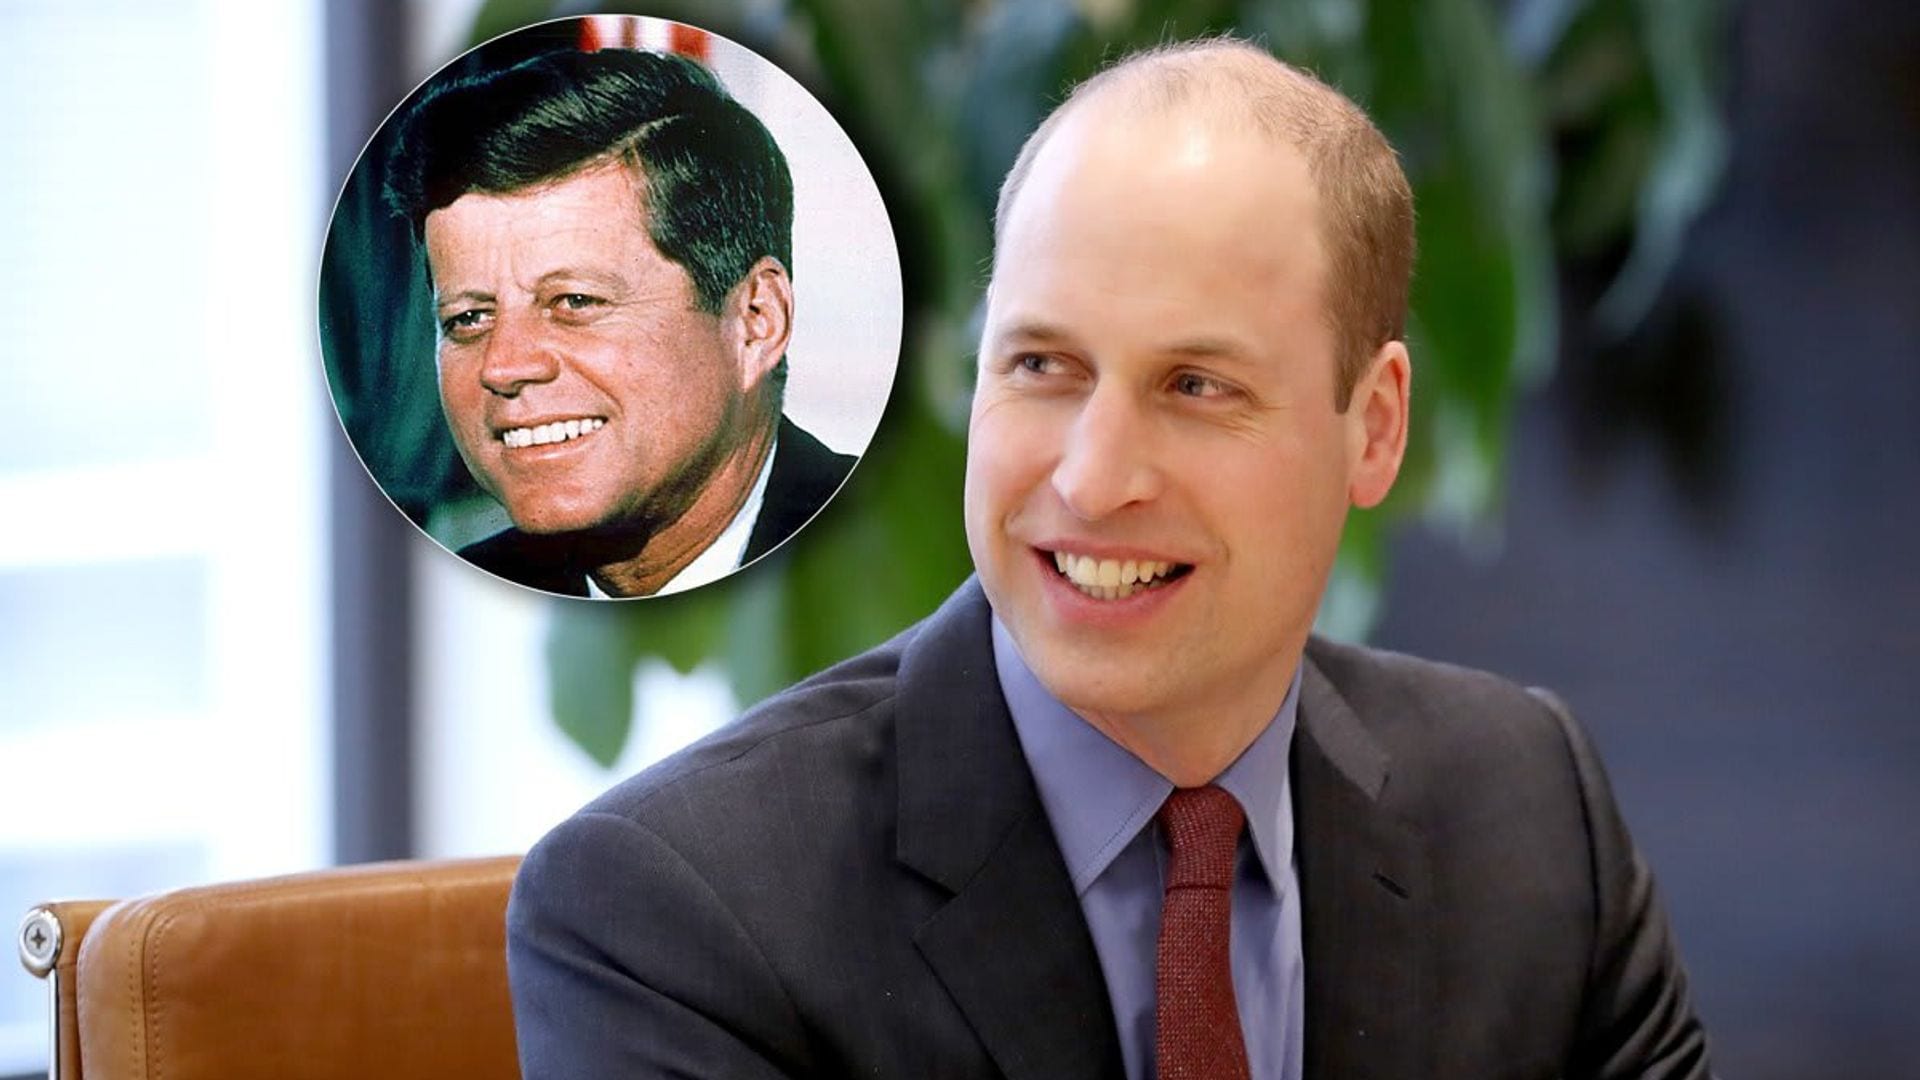 JFK’s daughter talks about Prince William’s ‘great tribute’ to her father